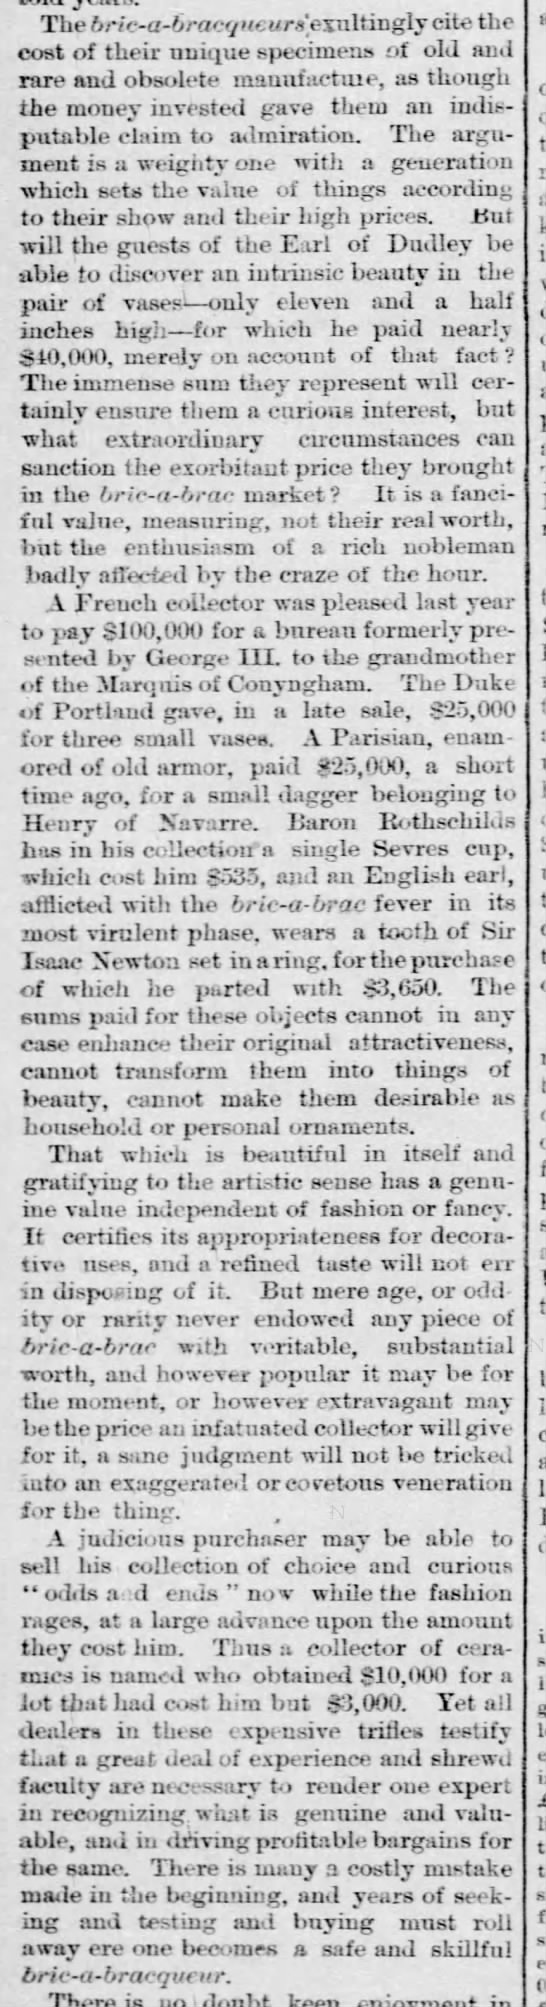 Article excerpt reflecting on the high prices people are willing to pay for bric-a-brac, 1878 - 